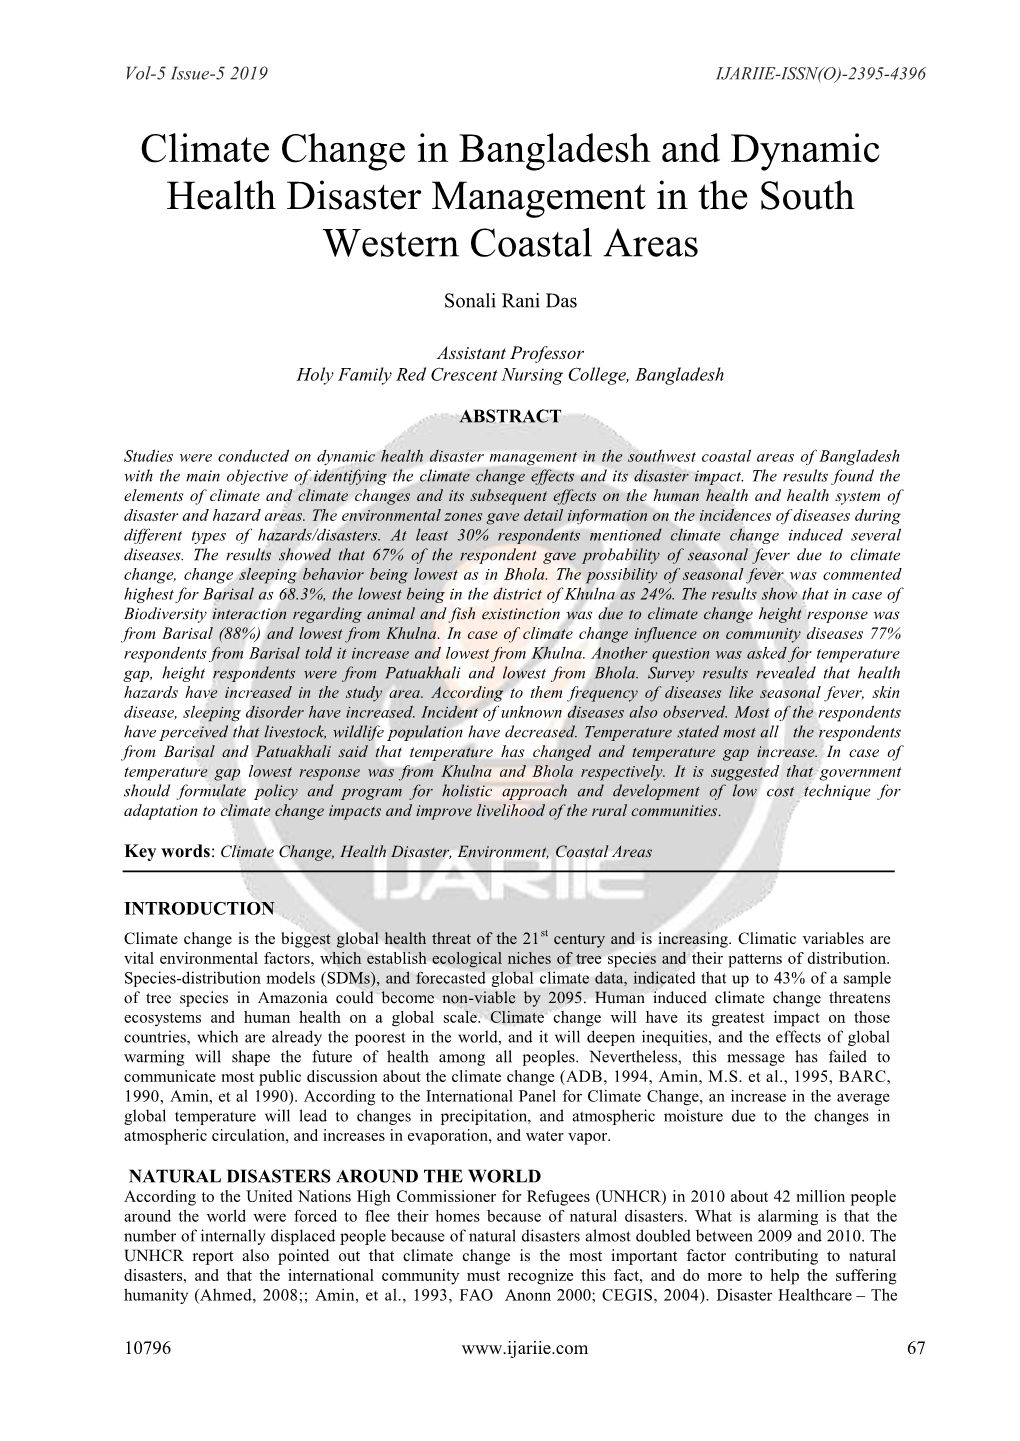 Climate Change in Bangladesh and Dynamic Health Disaster Management in the South Western Coastal Areas